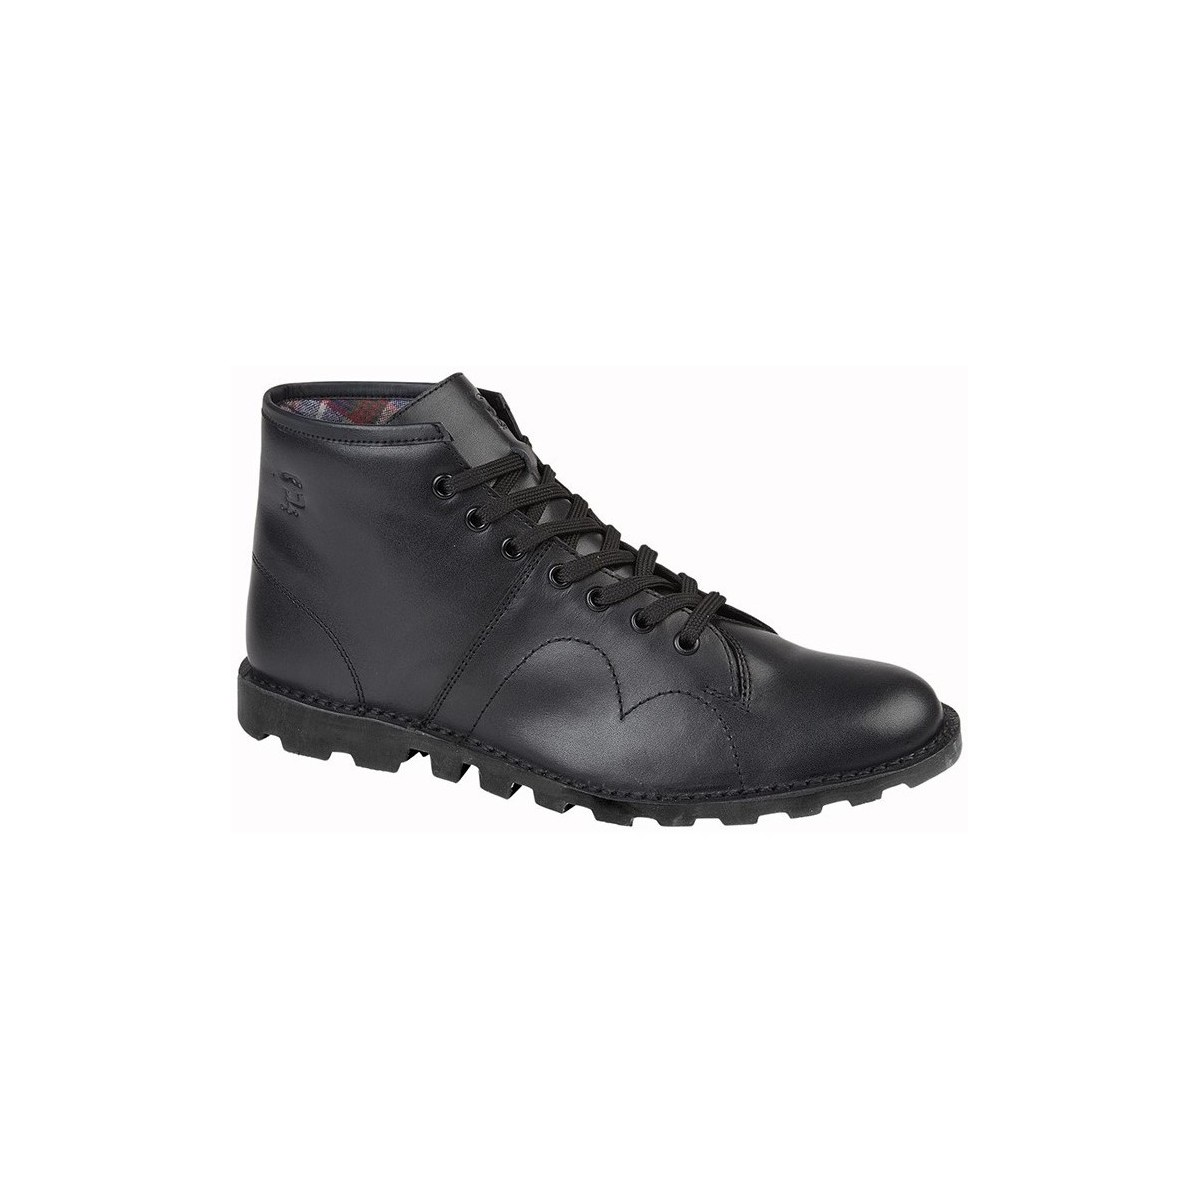 Chaussures Homme Bottes Grafters  Noir